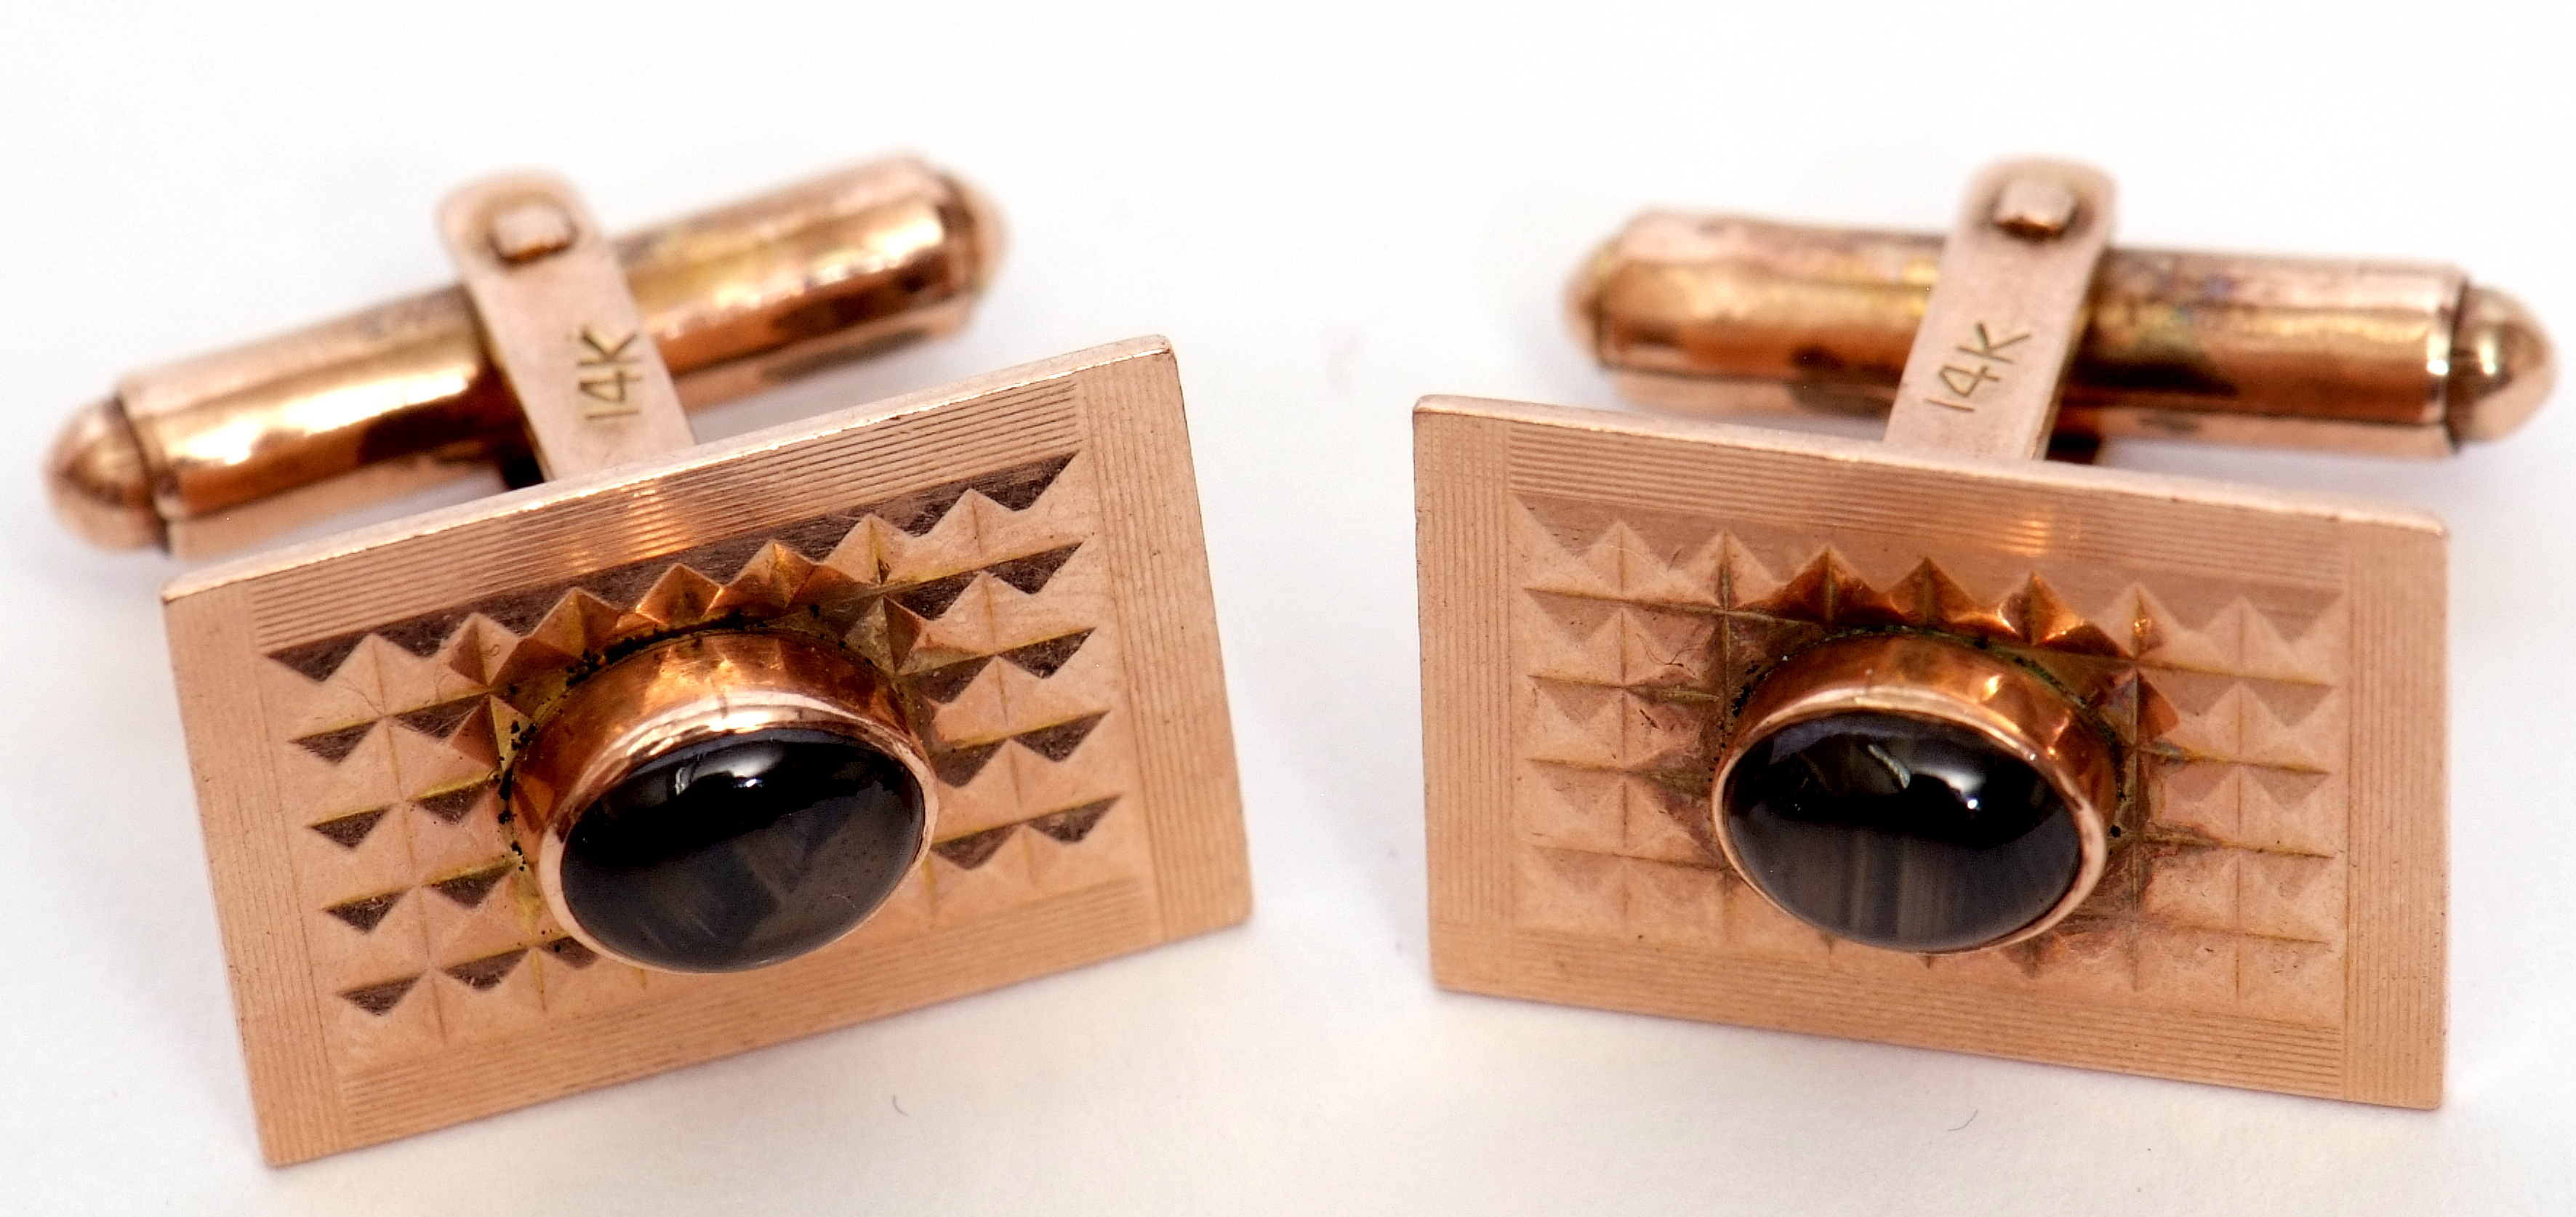 Pair of 14k stamped stylised cuff links each centring an oval cabochon tiger's eye stone, raised